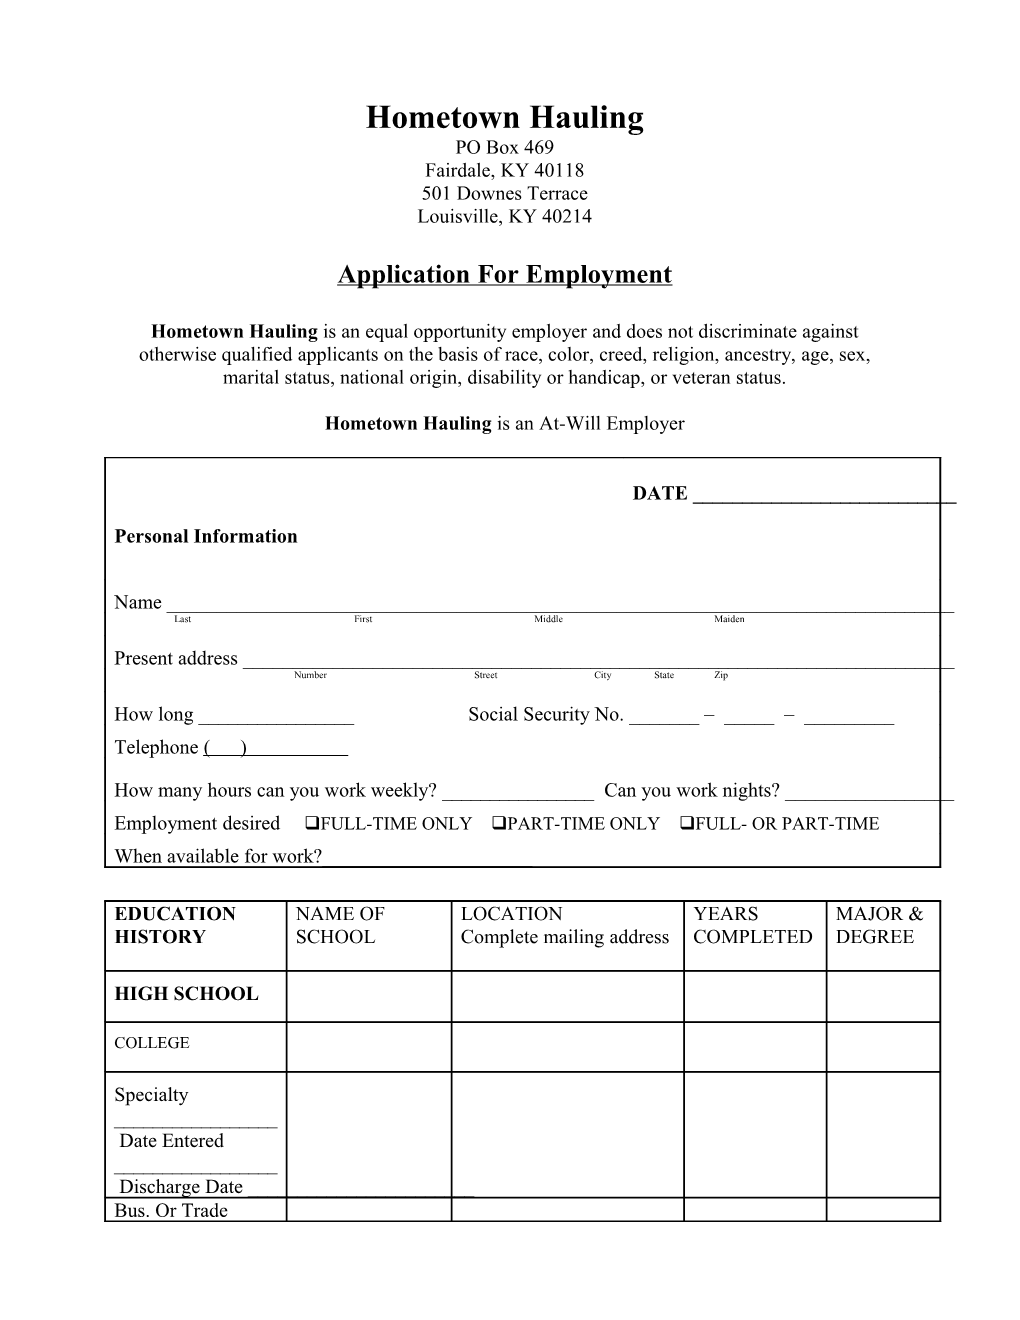 Hometown Hauling Application for Employment